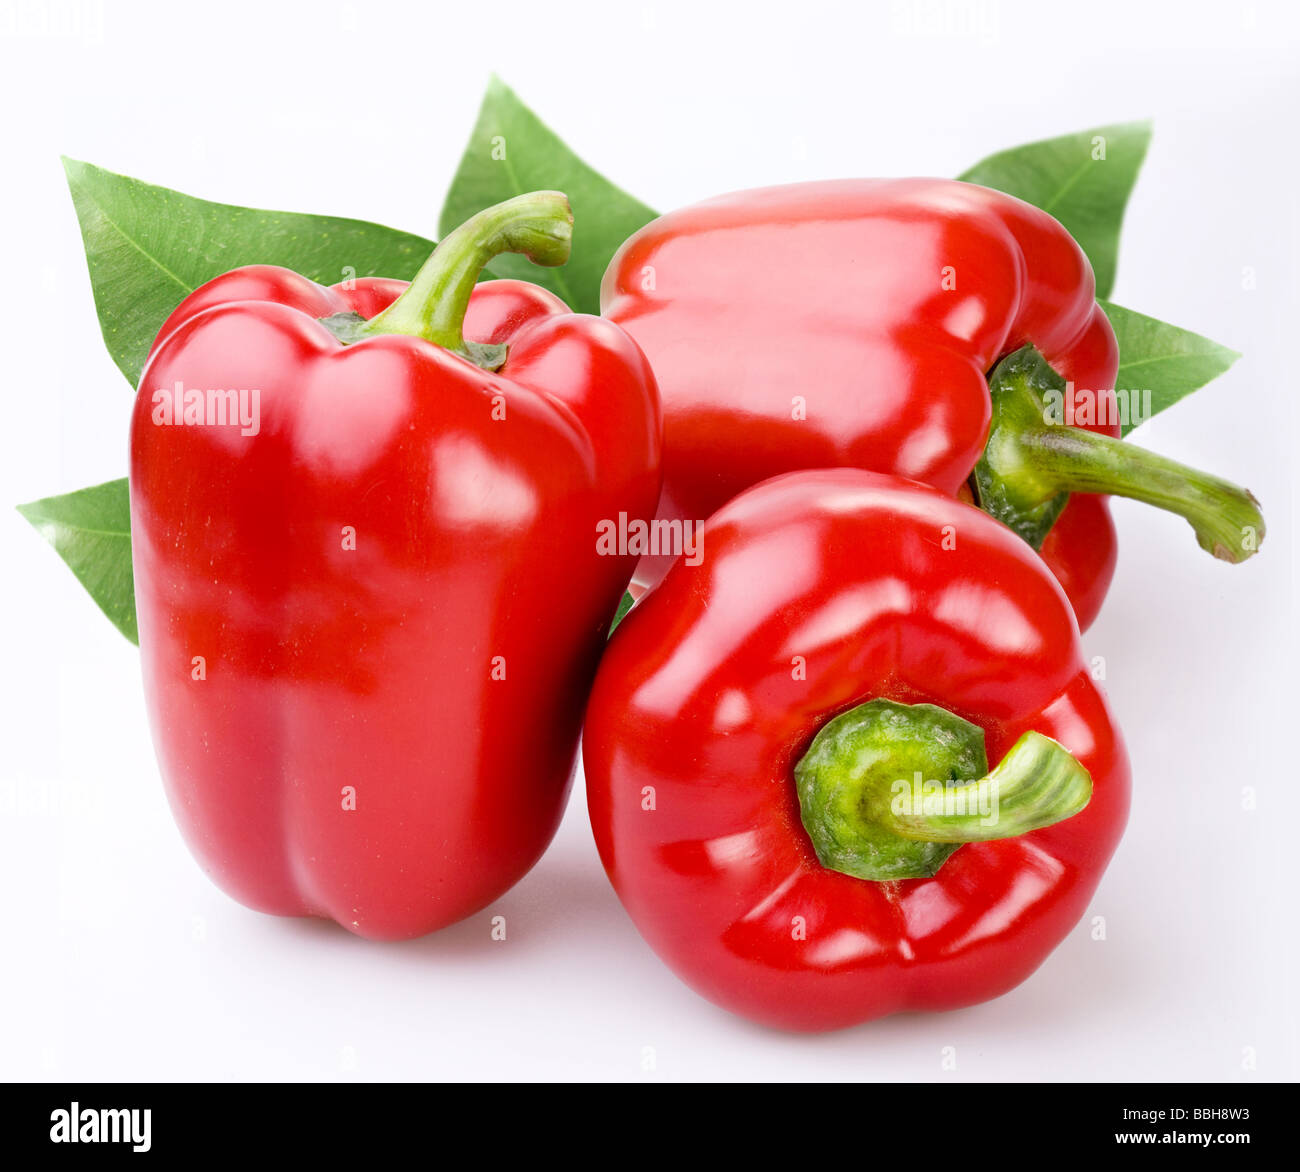 Paprika is on a white background Stock Photo